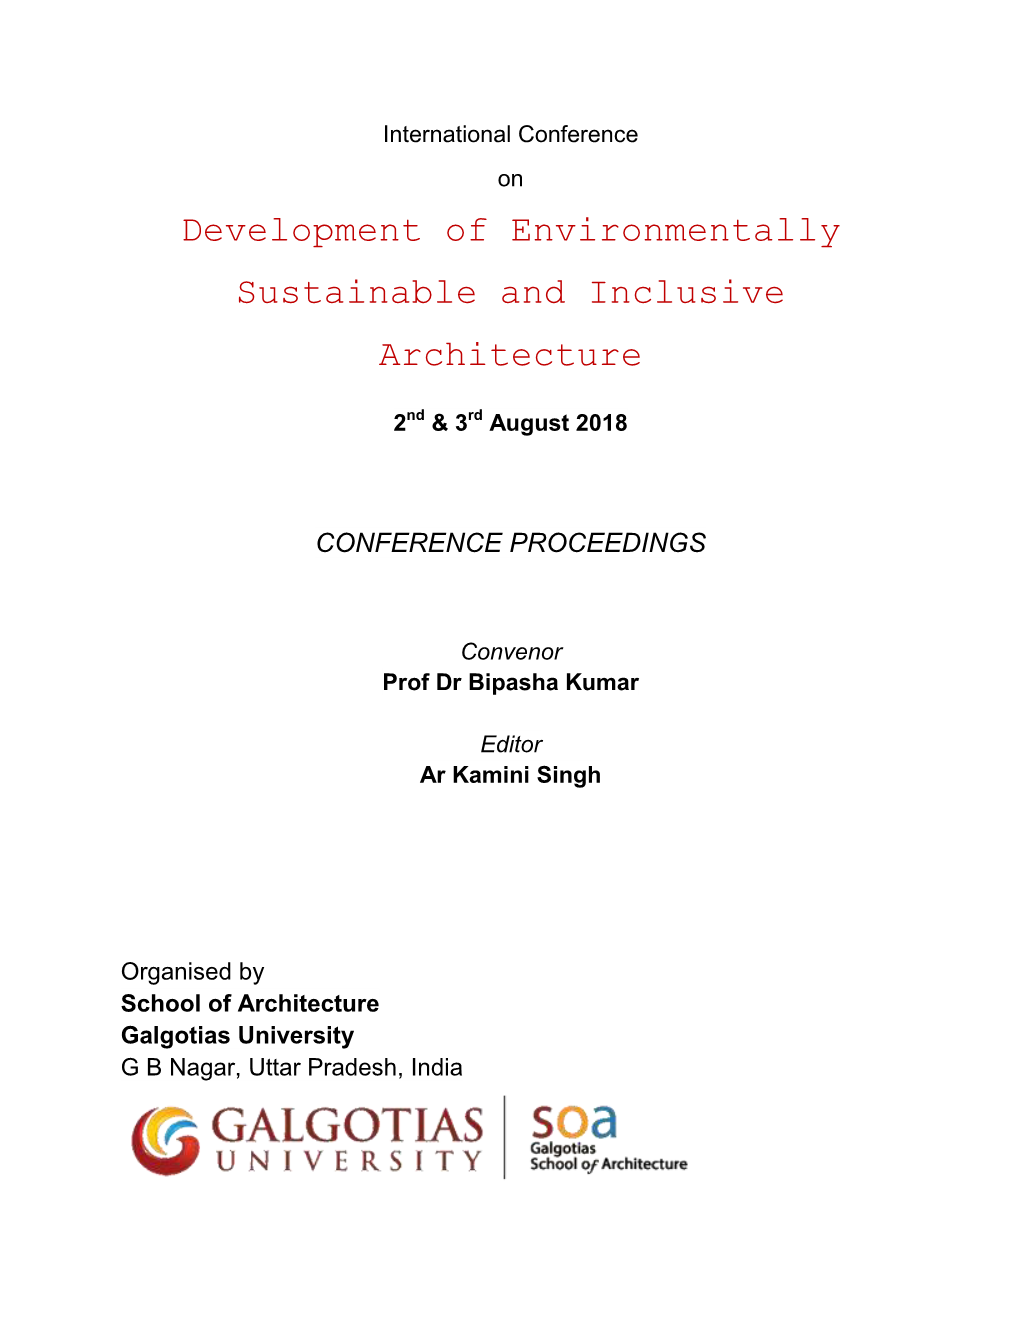 International Conference on Development of Environmentally Sustainable and Inclusive Architecture